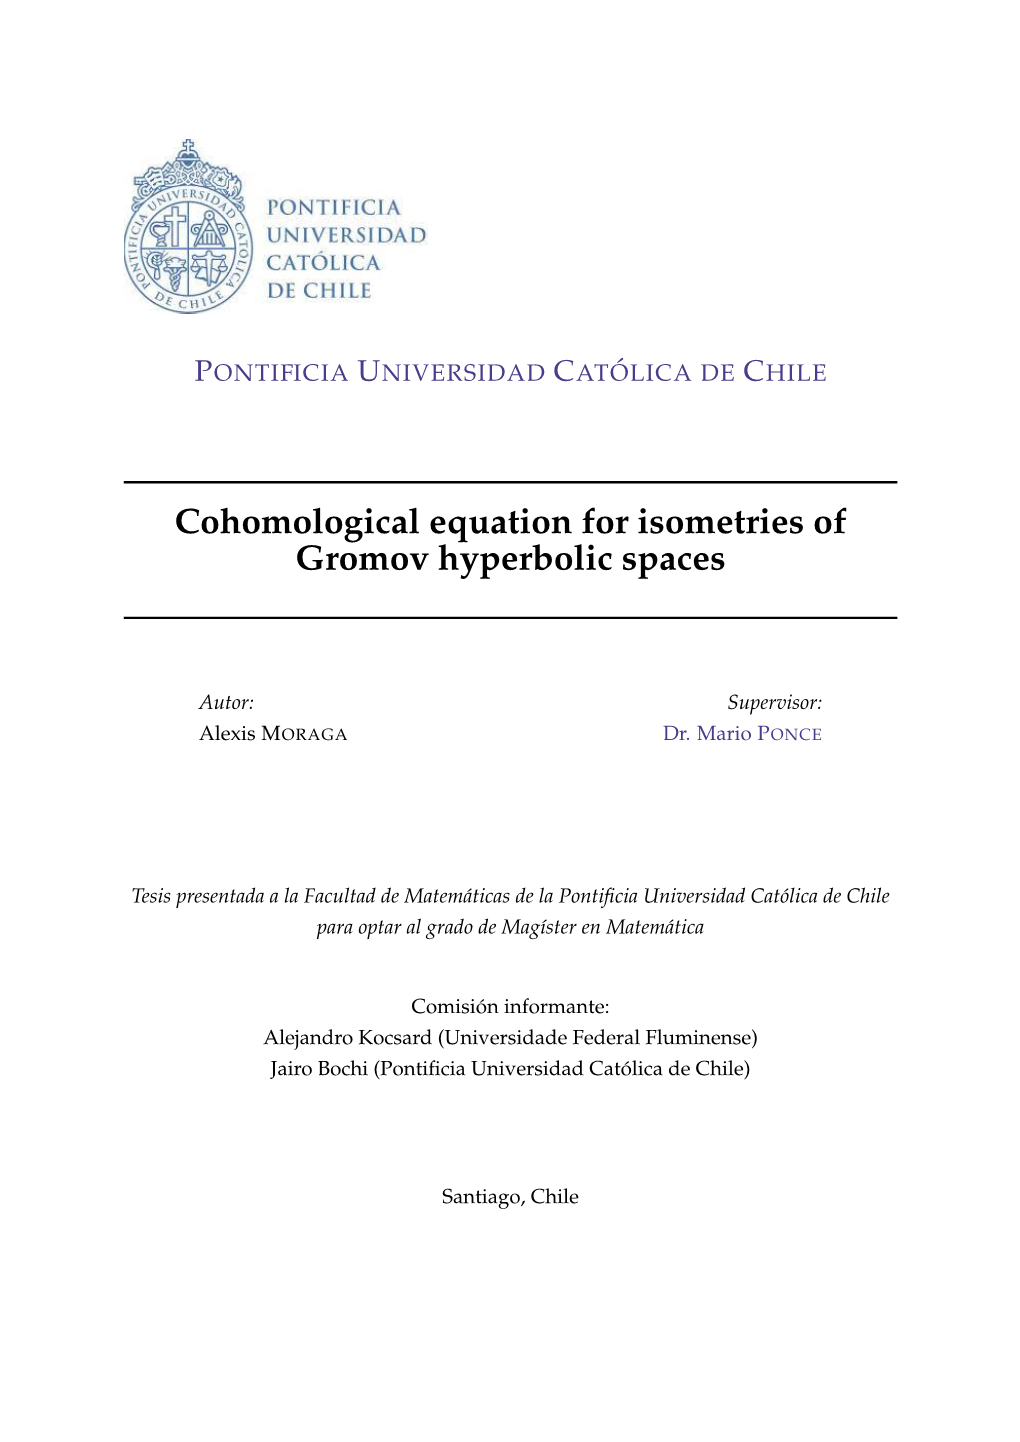 Cohomological Equation for Isometries of Gromov Hyperbolic Spaces